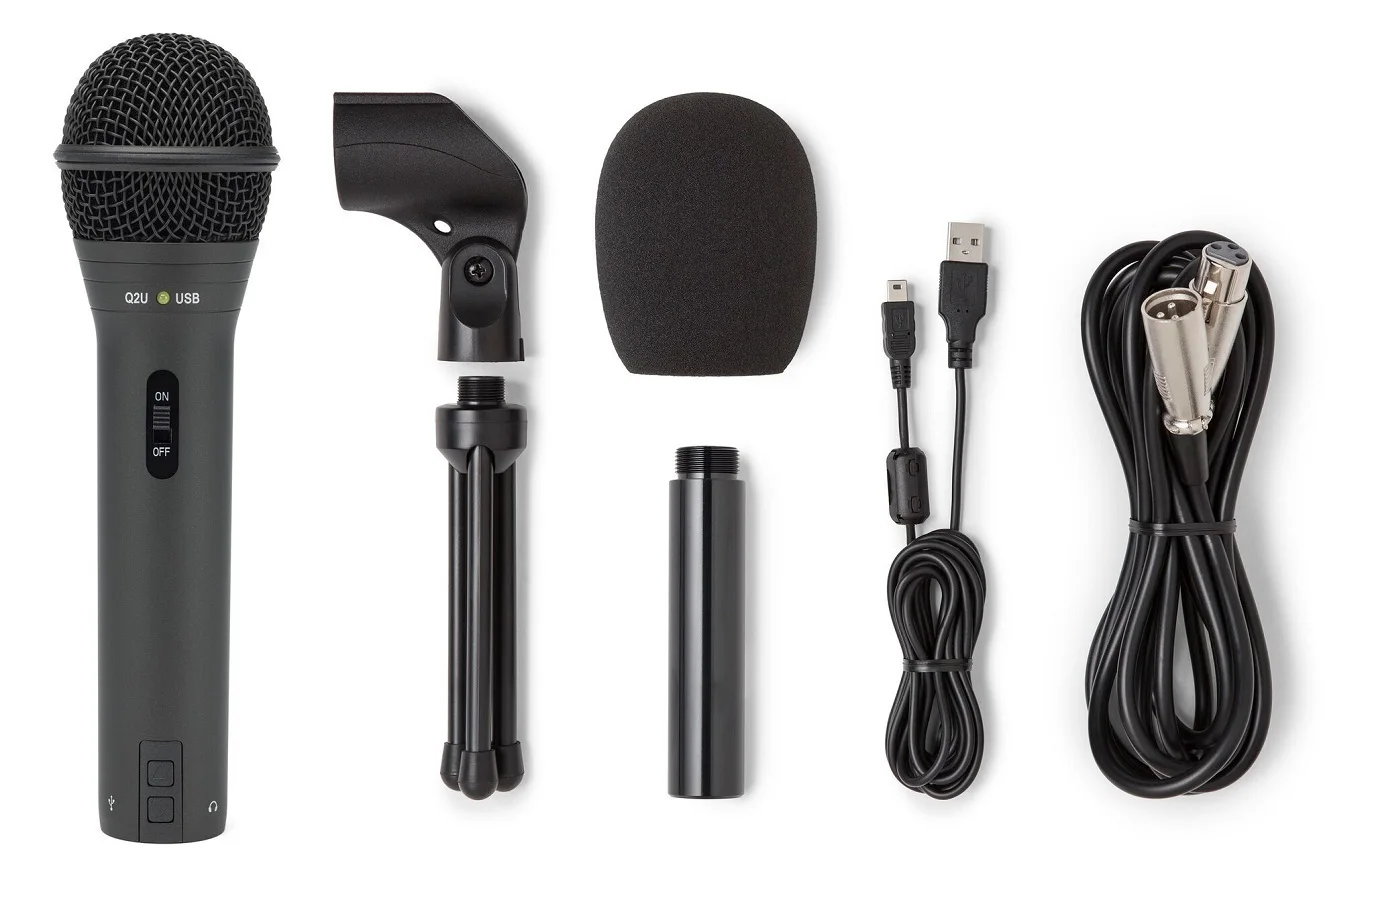 Handheld Dynamic USB Microphone Recording and Podcasting Pack (Black) enlarge